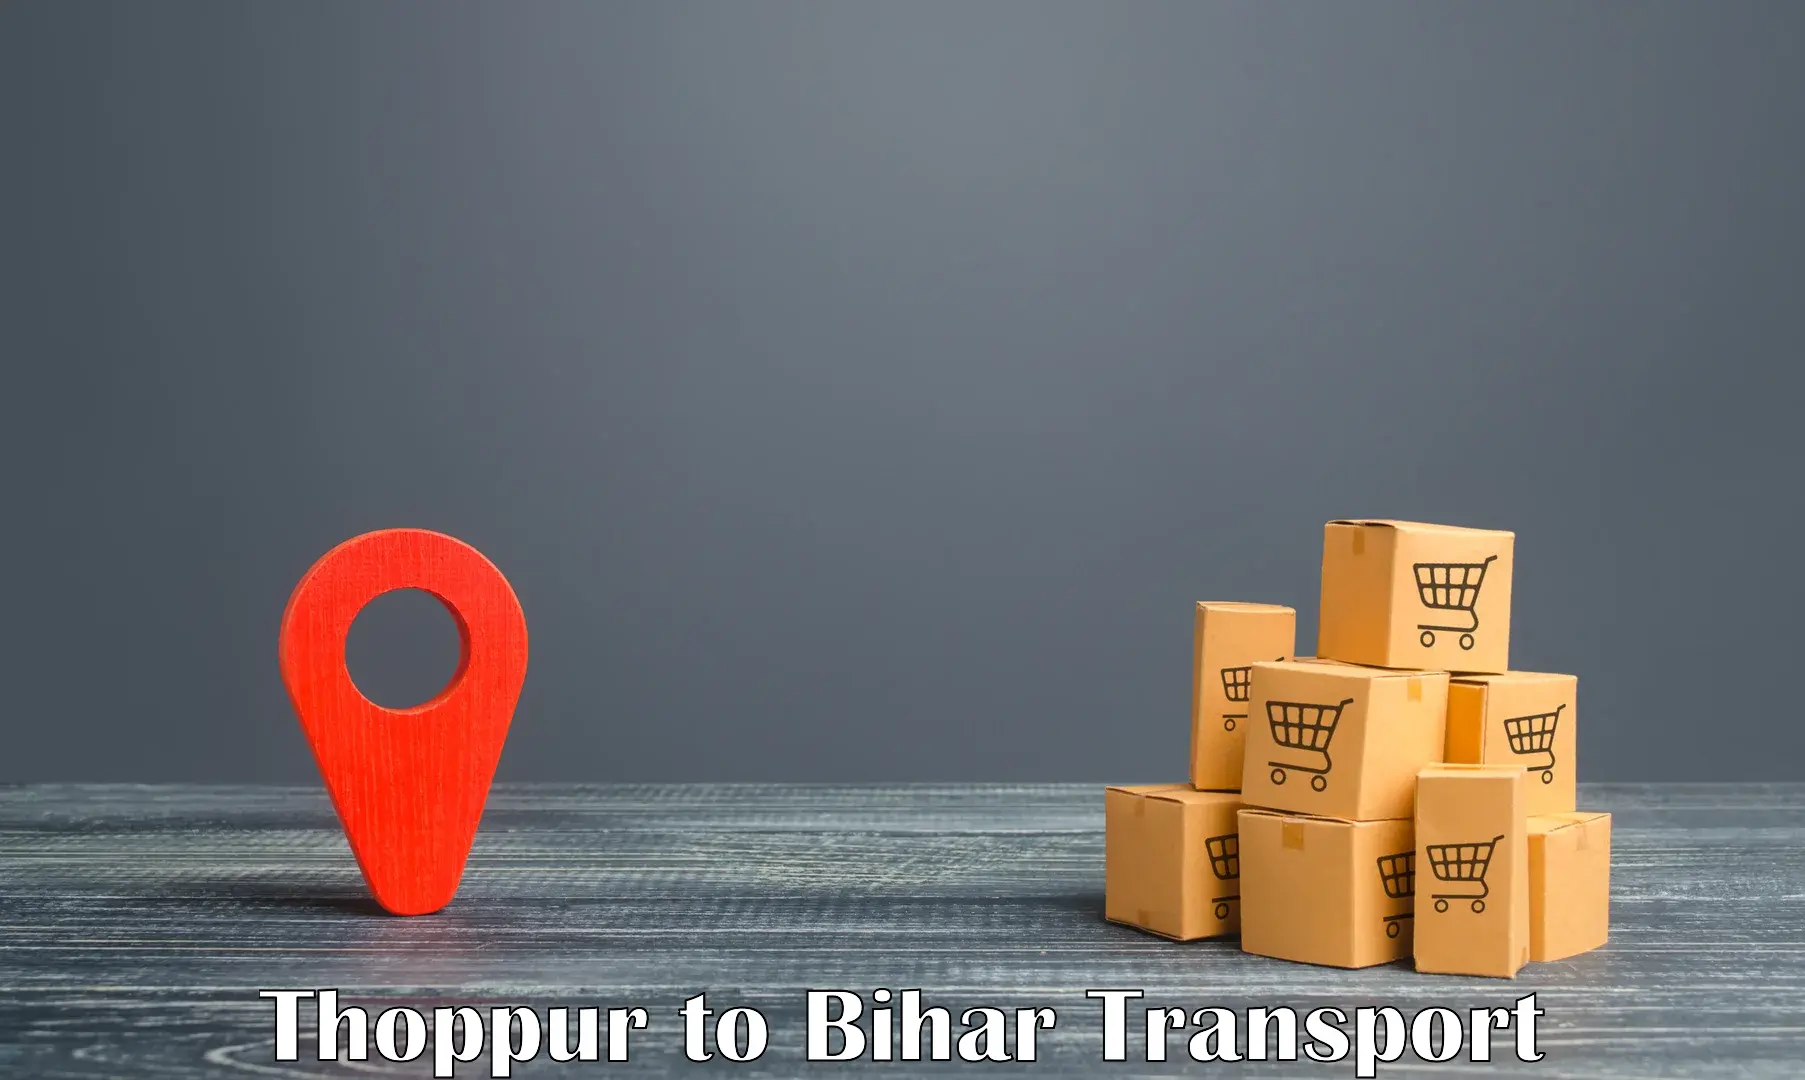 Container transport service in Thoppur to Dhaka